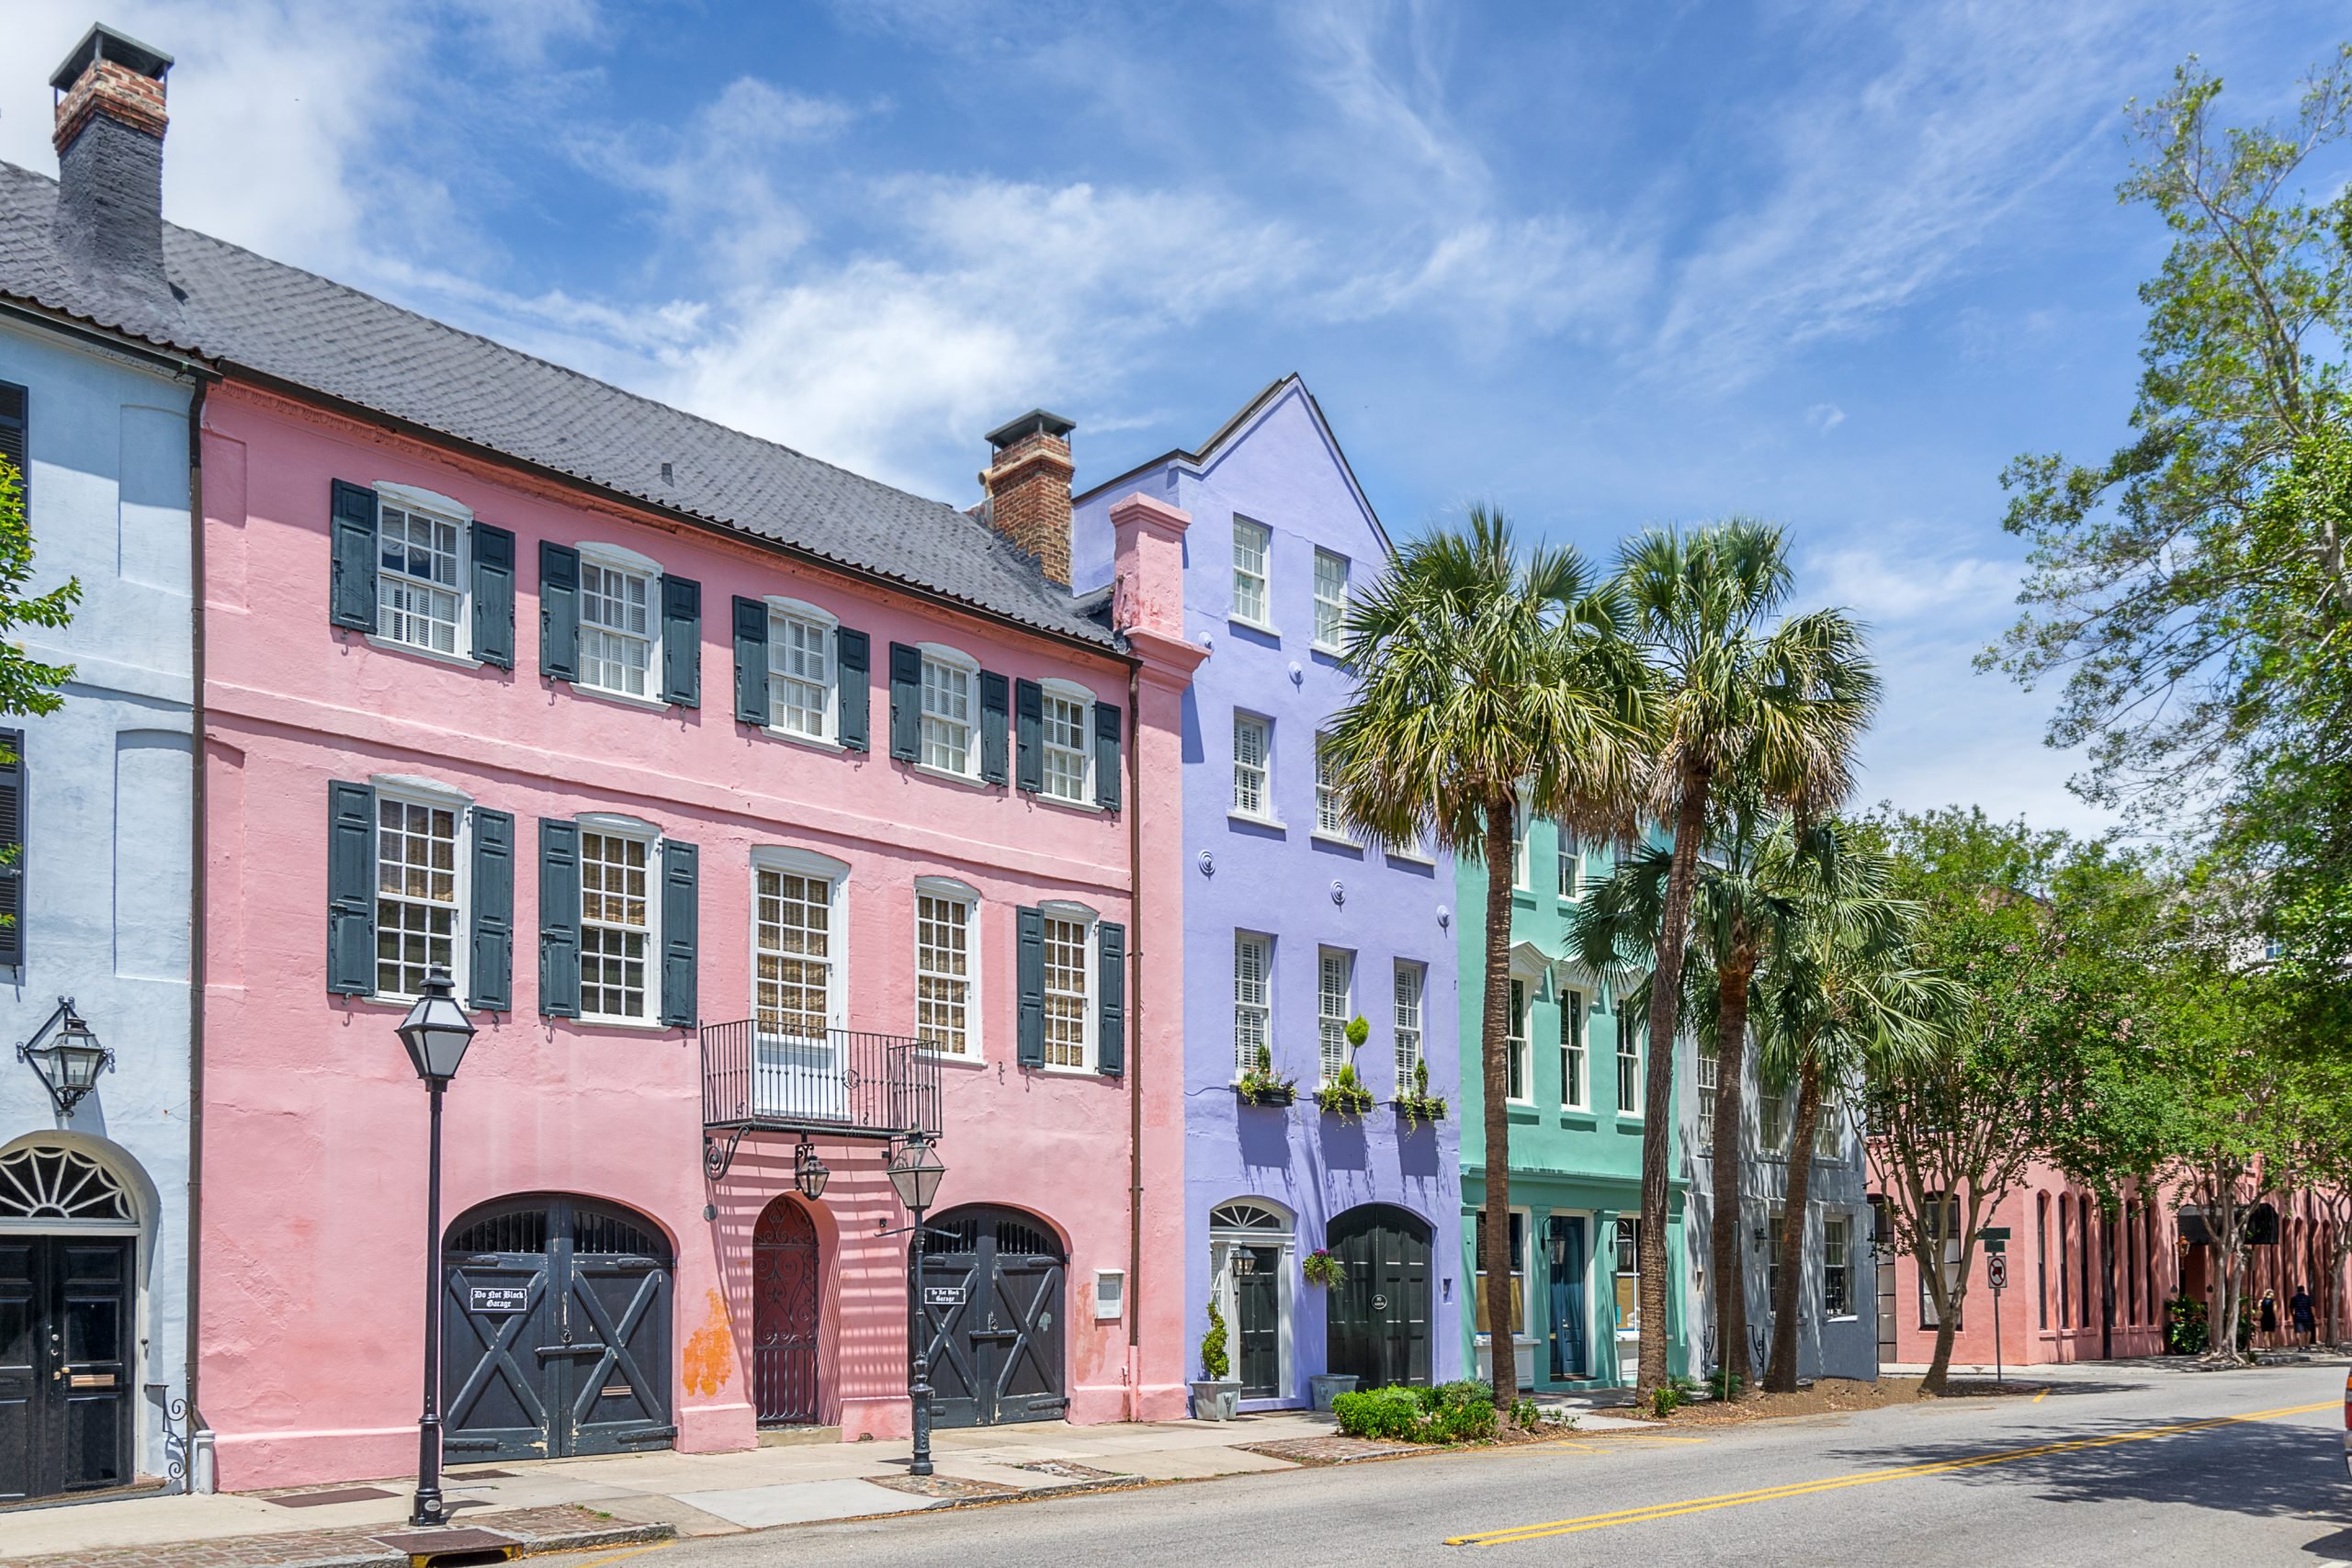 Photo of Rainbow Row in Charleston SC, a must see during a 3 day weekend in Charleston SC